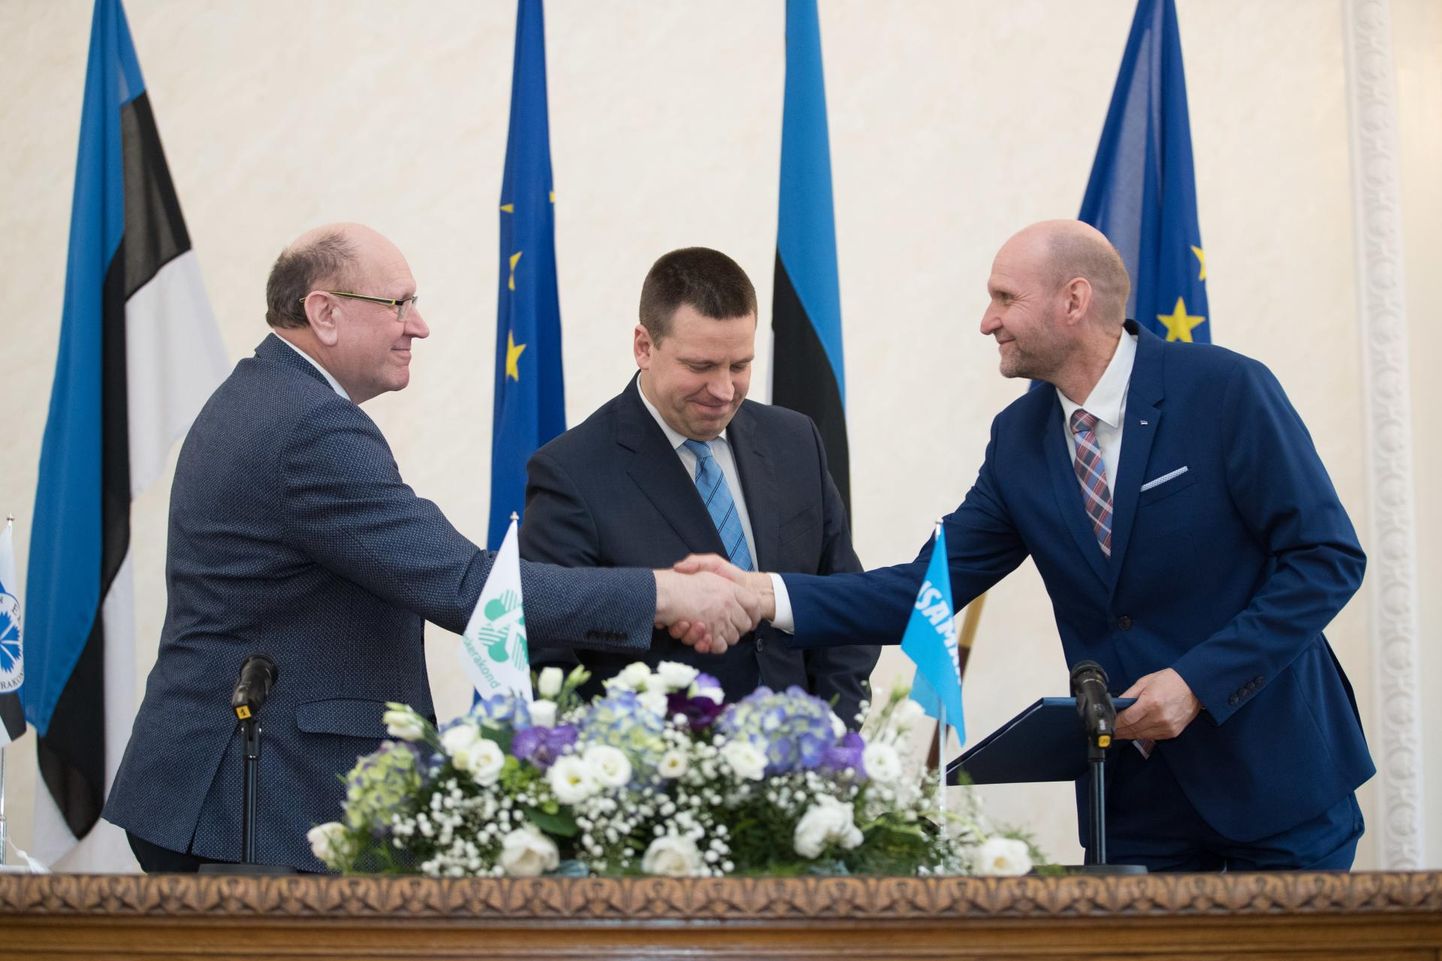 Chairman of Estonia's Center Party Juri Ratas, chairman of the Estonian Conservative People's Party (EKRE) Mart Helme and chairman of Isamaa Helir Valdor Seeder signed a coalition agreement.